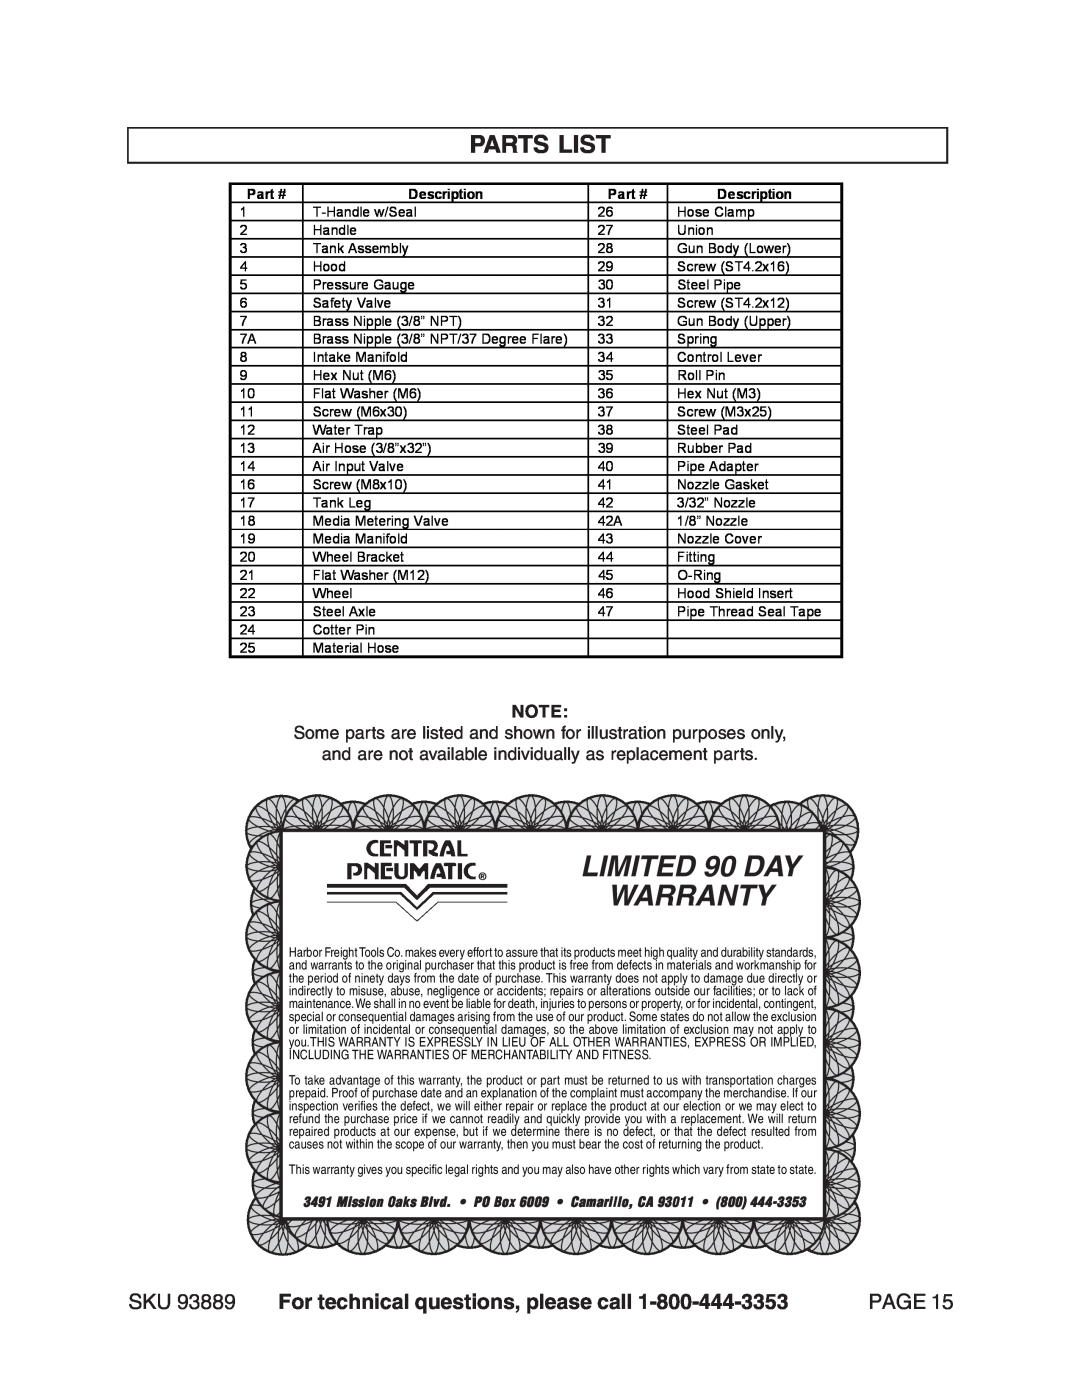 Harbor Freight Tools manual Parts List, LIMITED 90 DAY WARRANTY, SKU 93889 For technical questions, please call, Page 